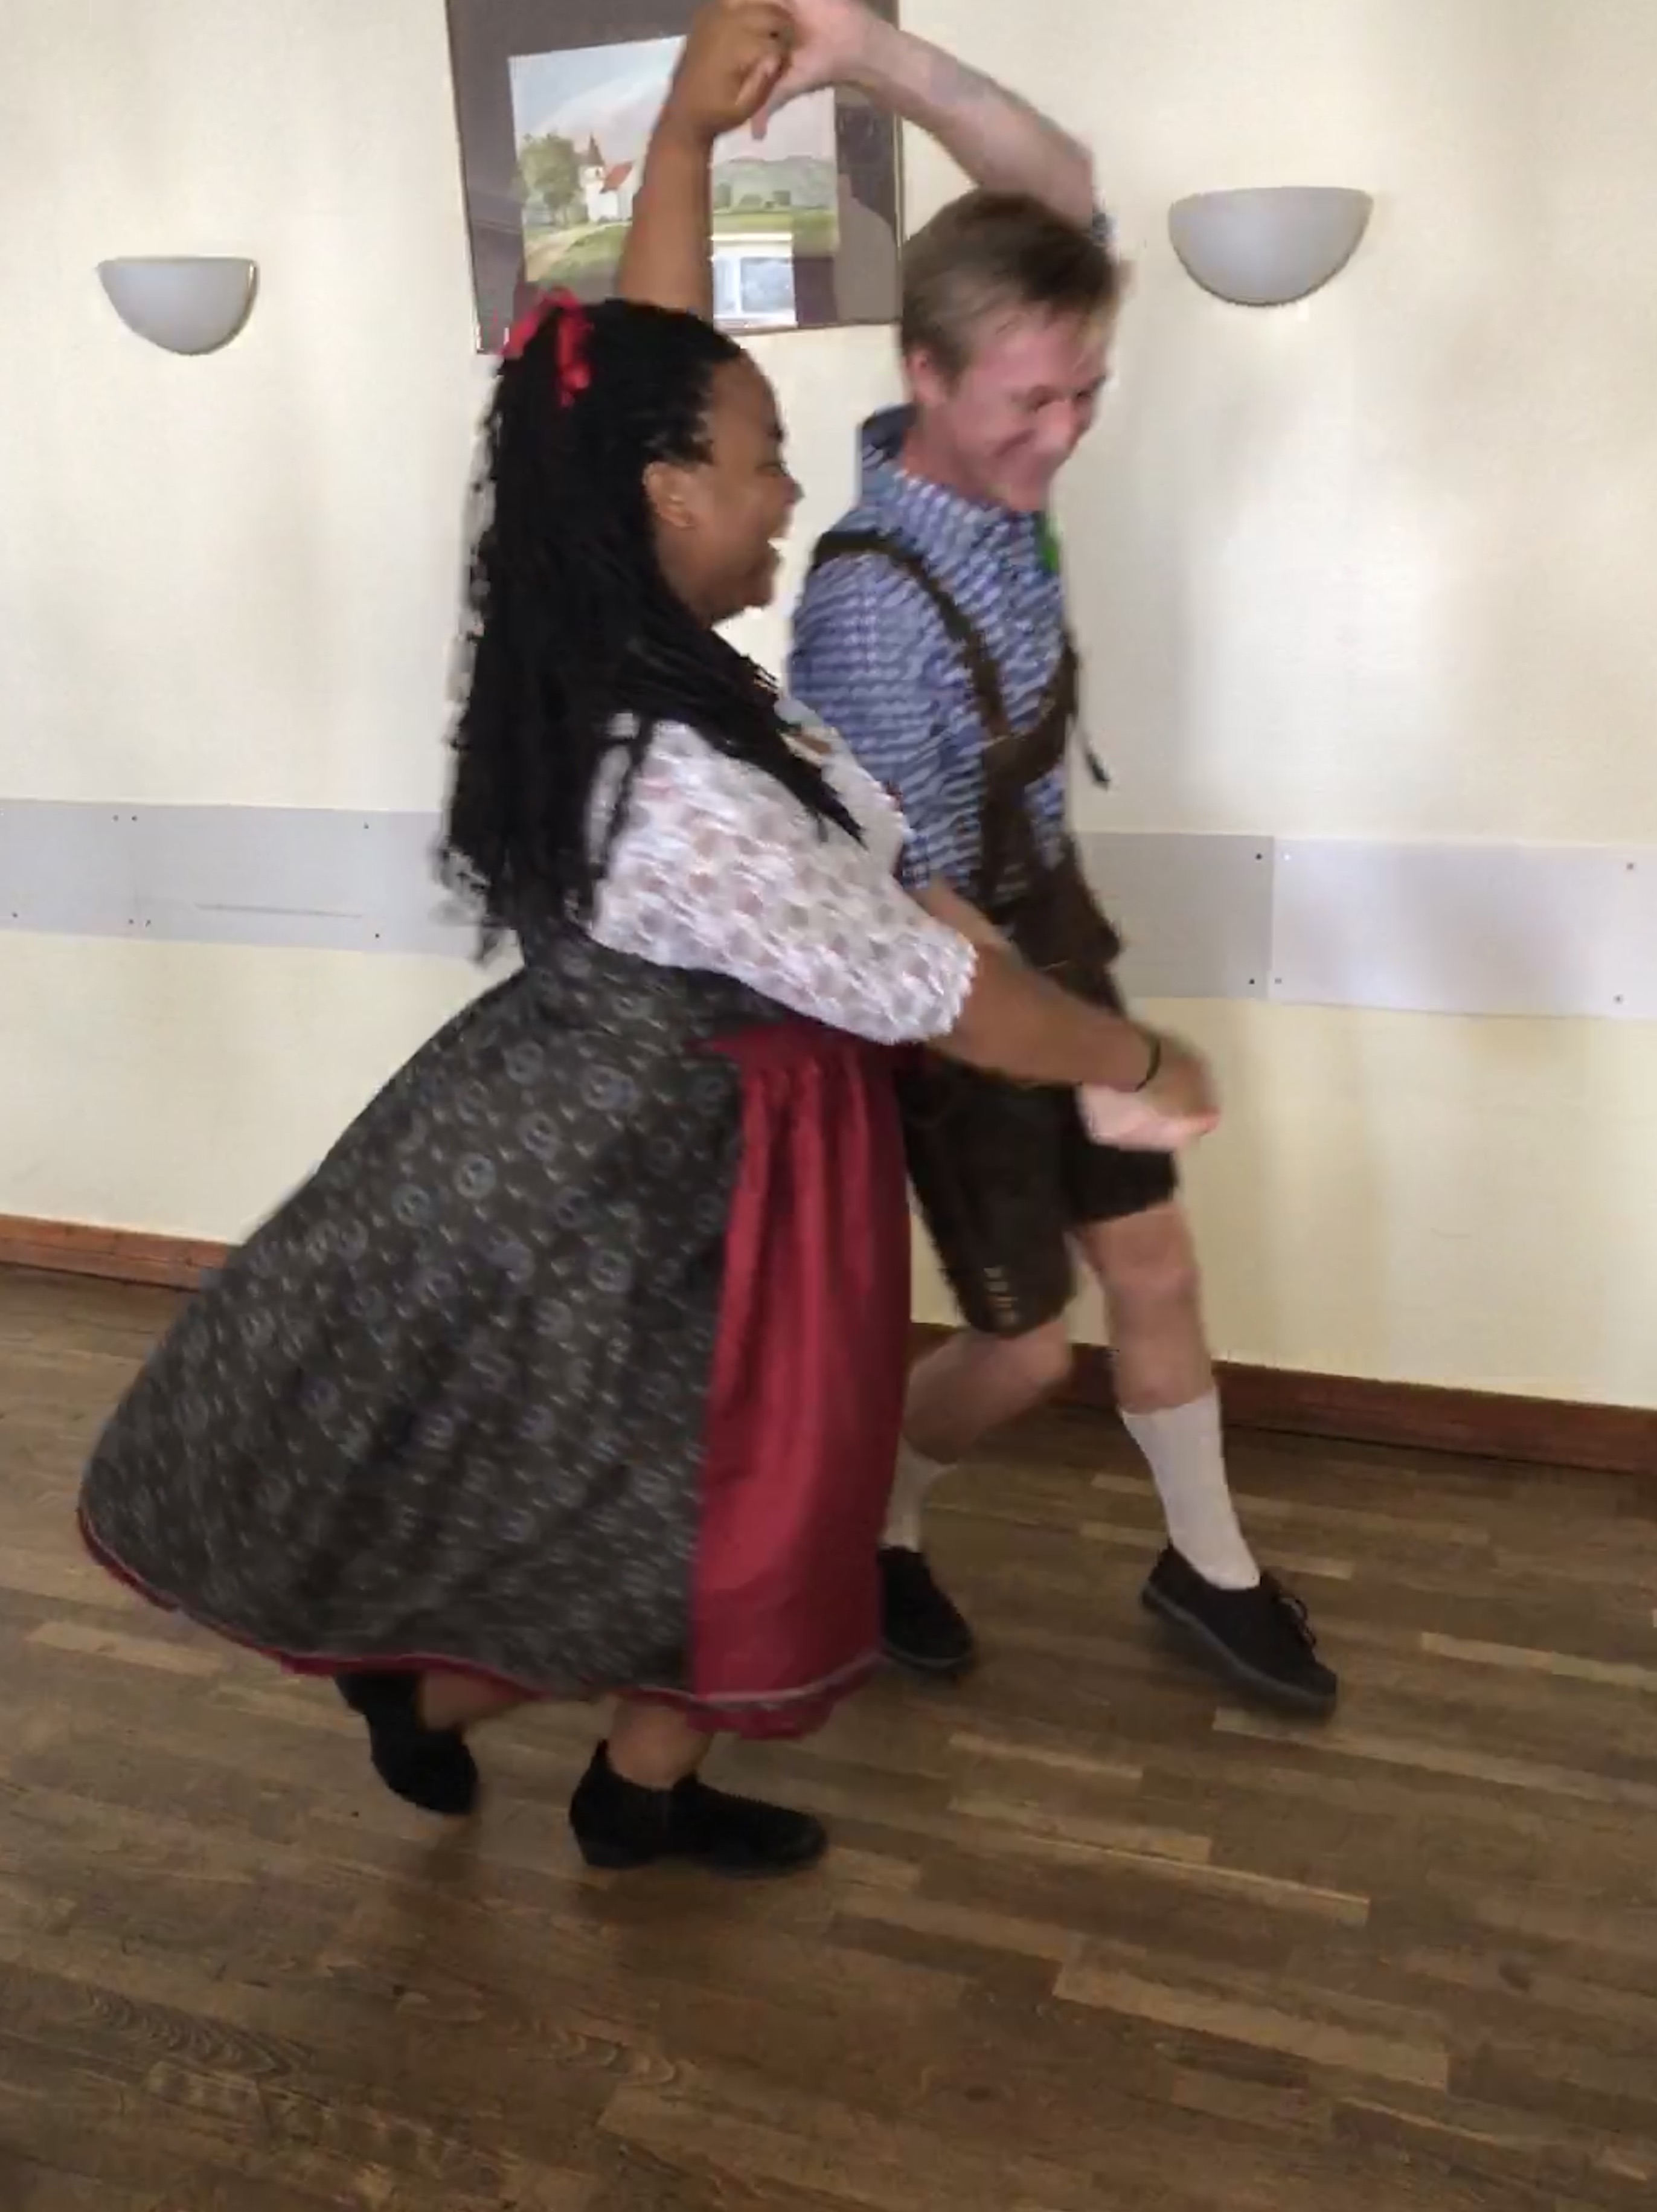 Lyric and Sam in traditional Bavarian outfits dancing